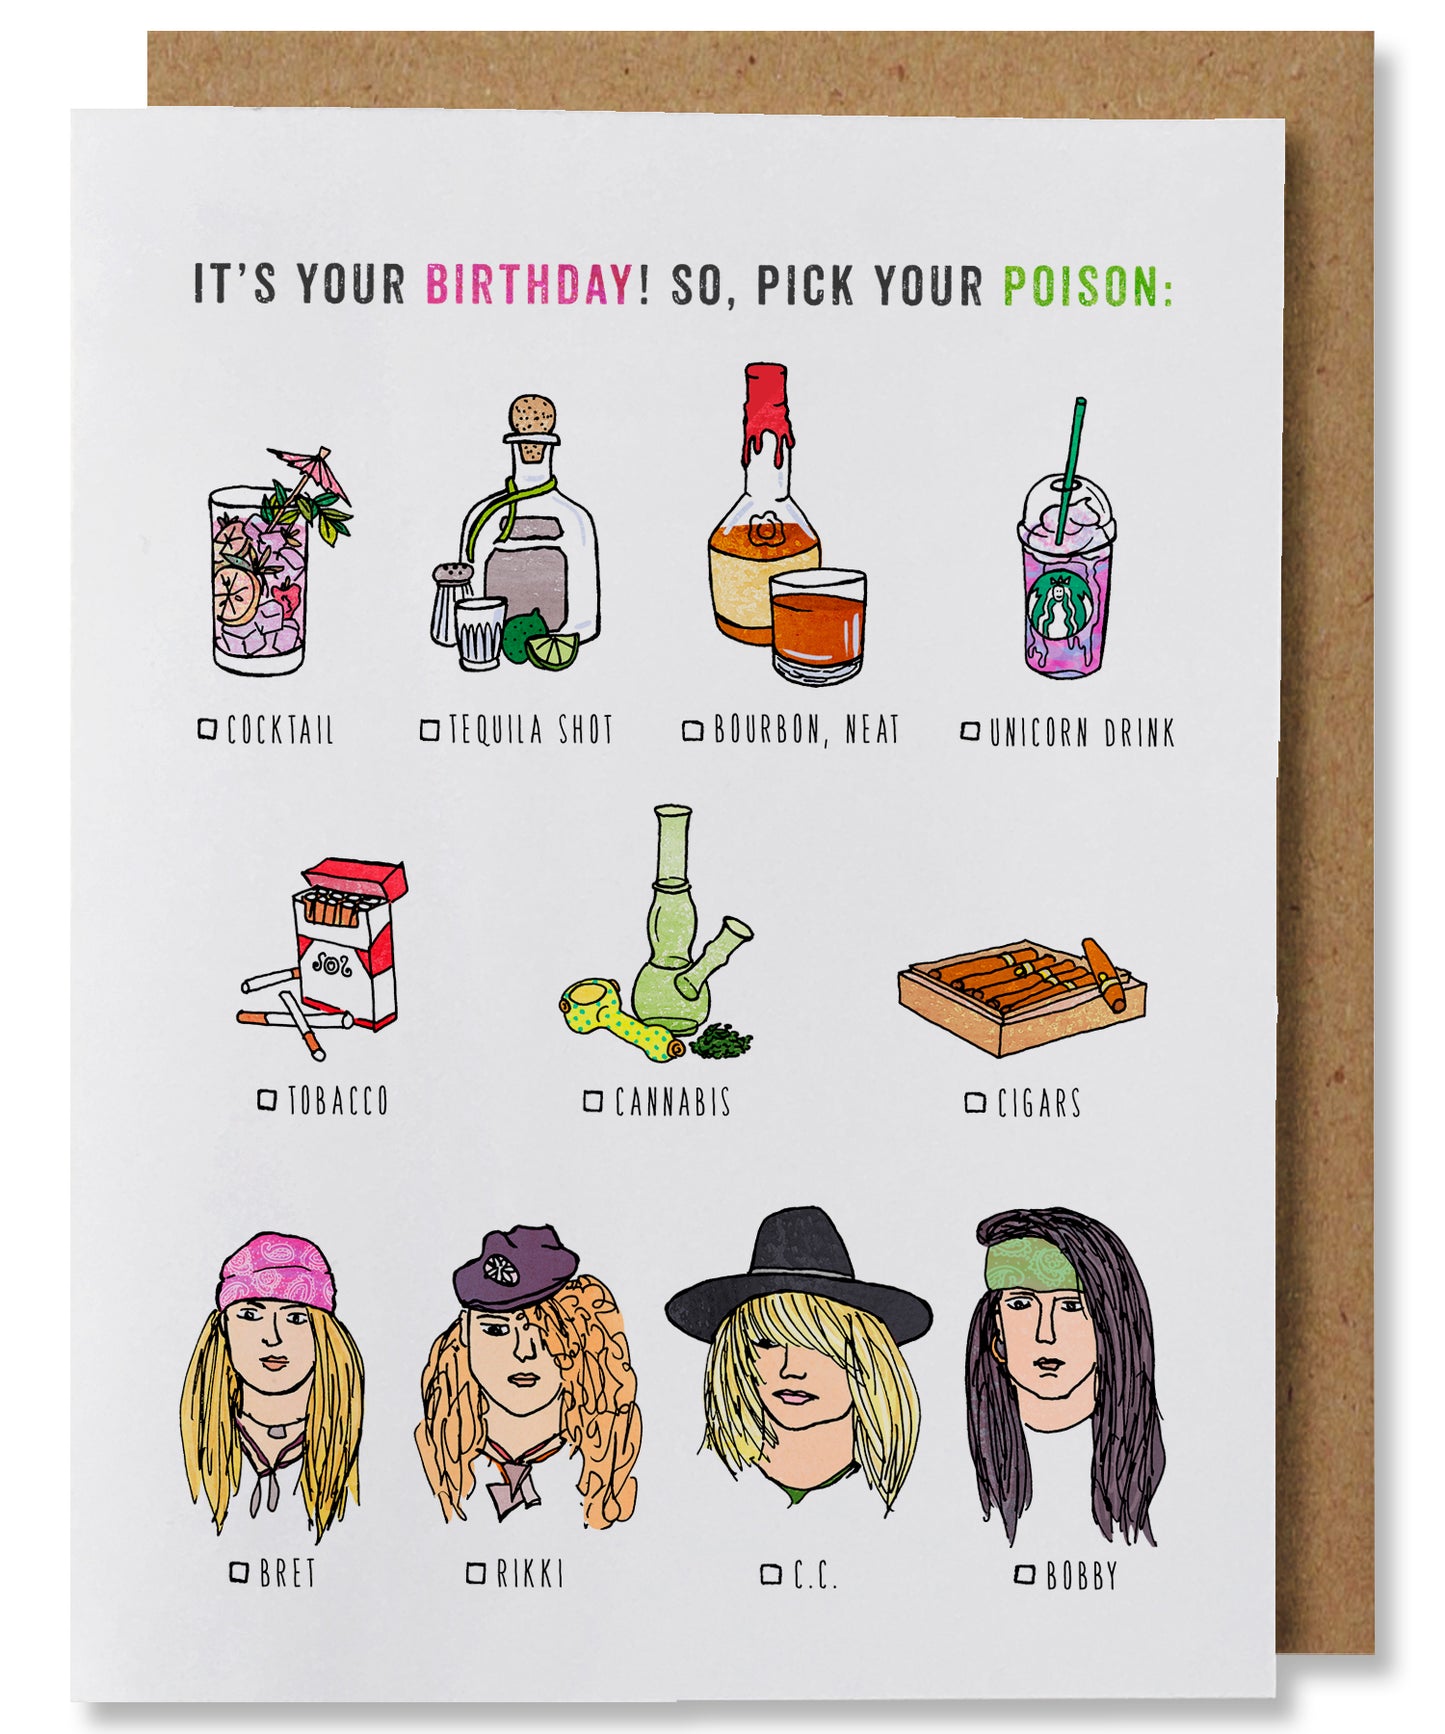 Pick Your Poison -  Illustrated Funny Pun Birthday Card